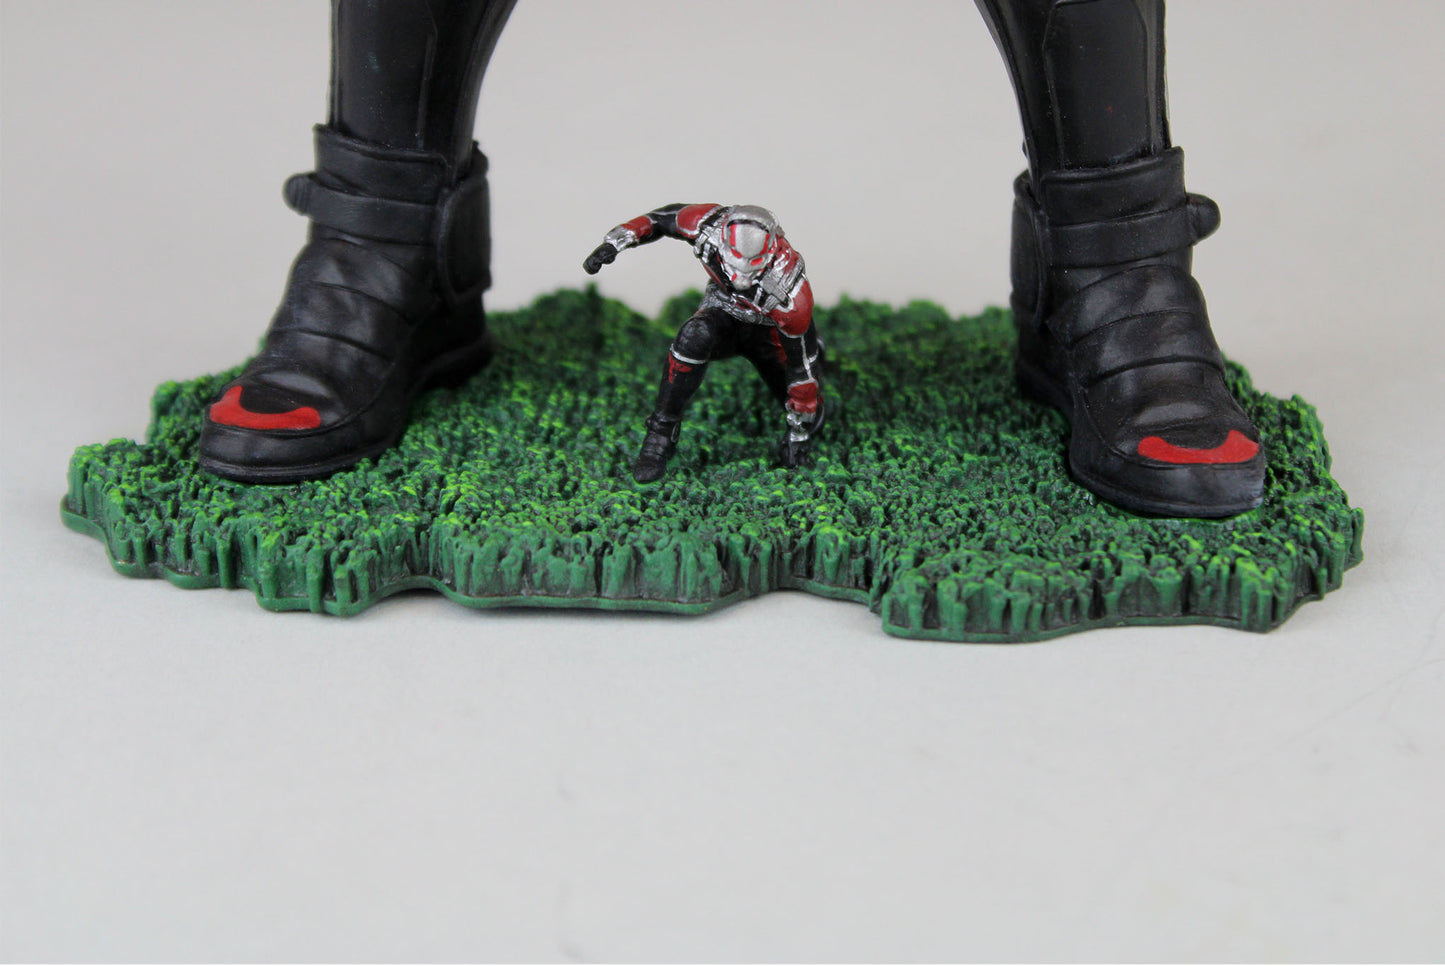 Load image into Gallery viewer, Ant-Man (Movie Version) Marvel Gallery Statue
